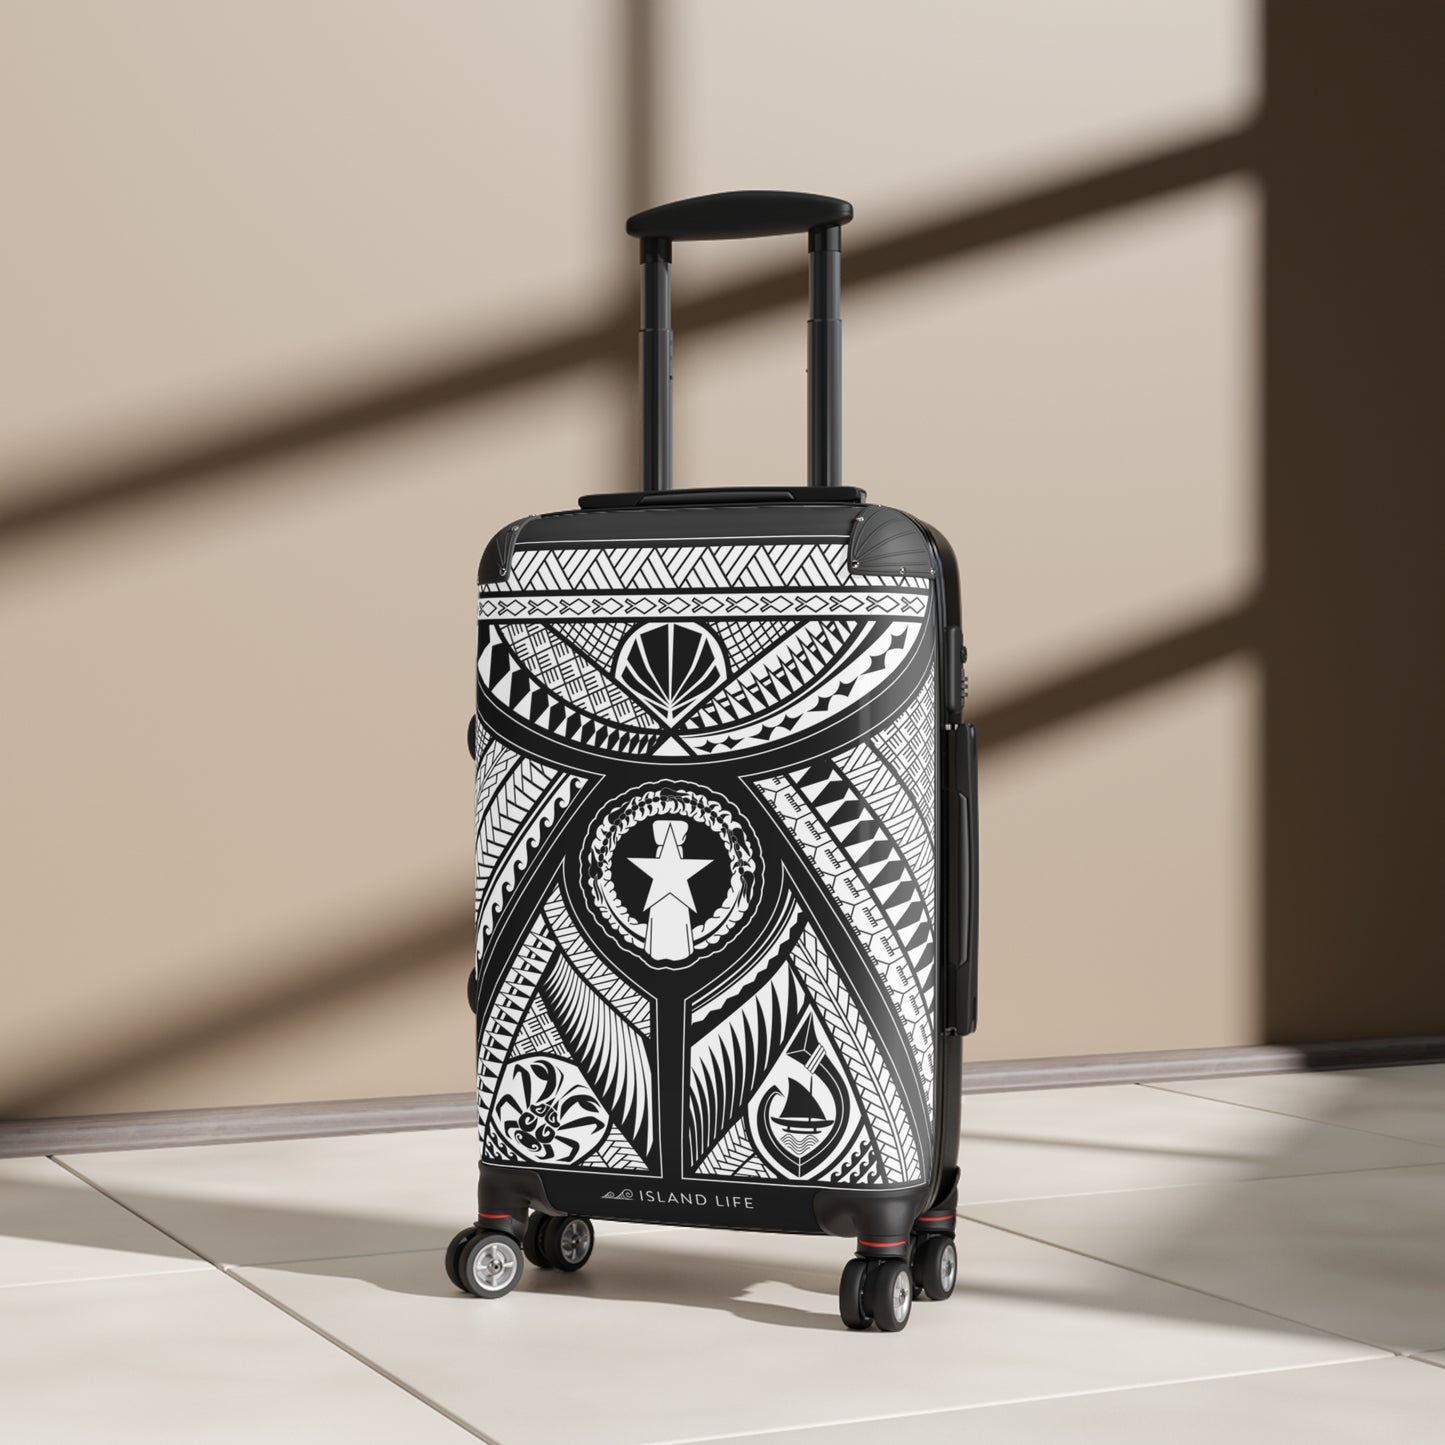 CNMI Marianas Tribal Carry On Cabin Suitcase